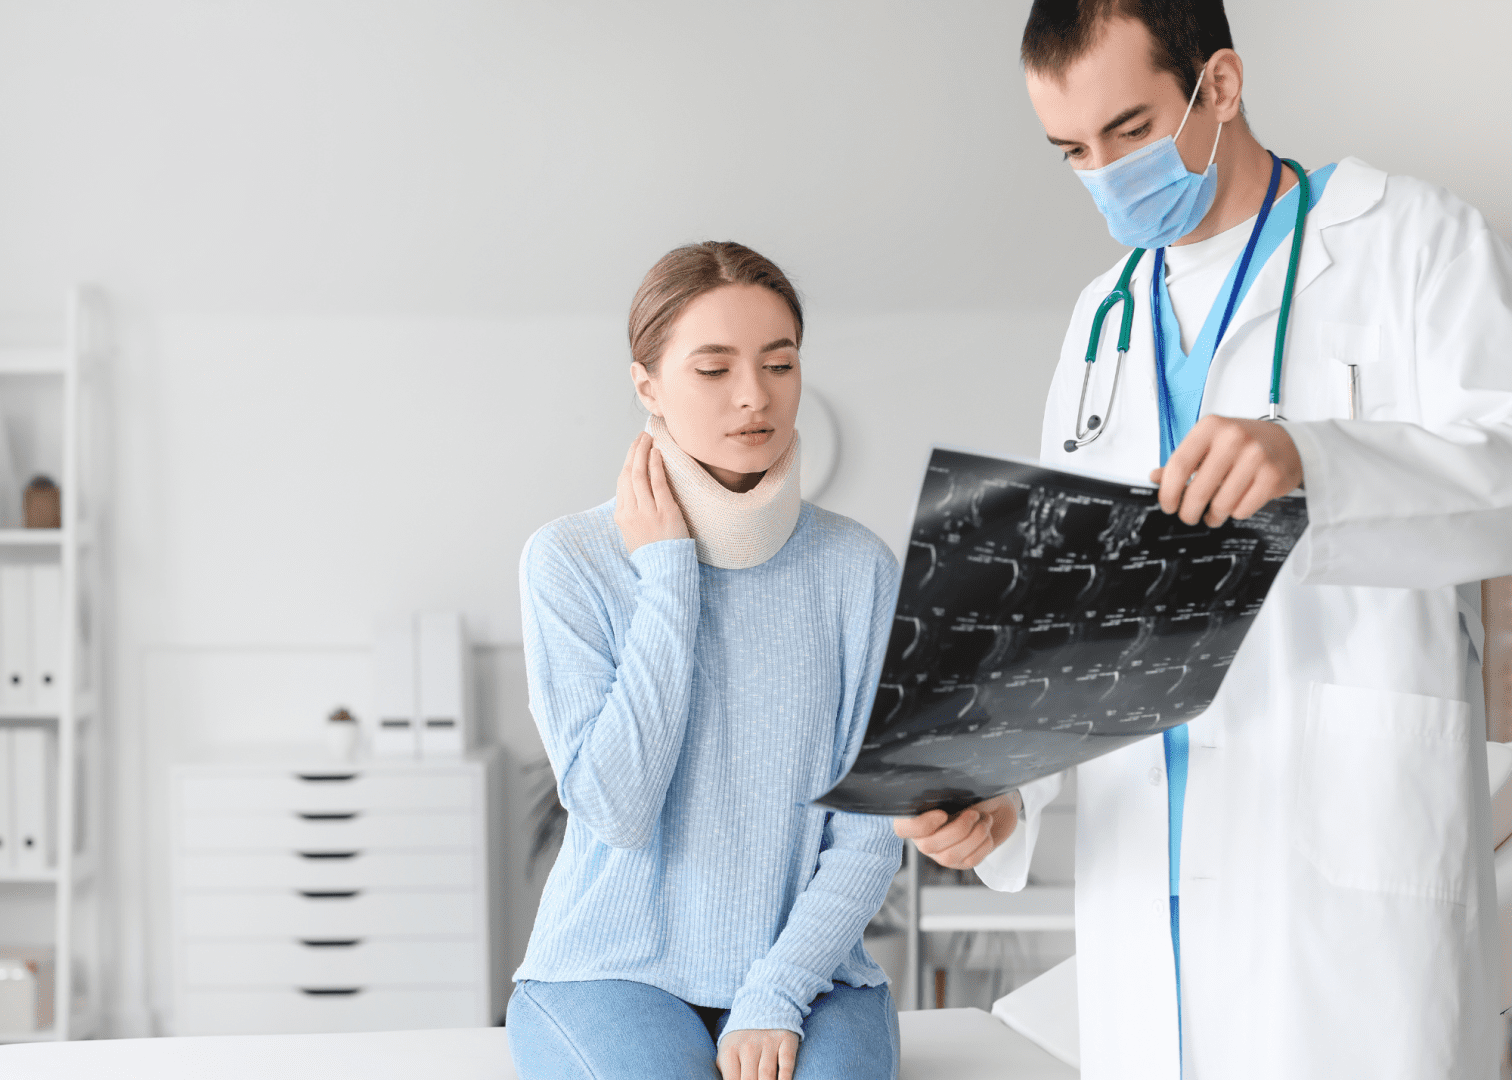 Medical Treatment for Injury - Rock Hill Injury Lawyer